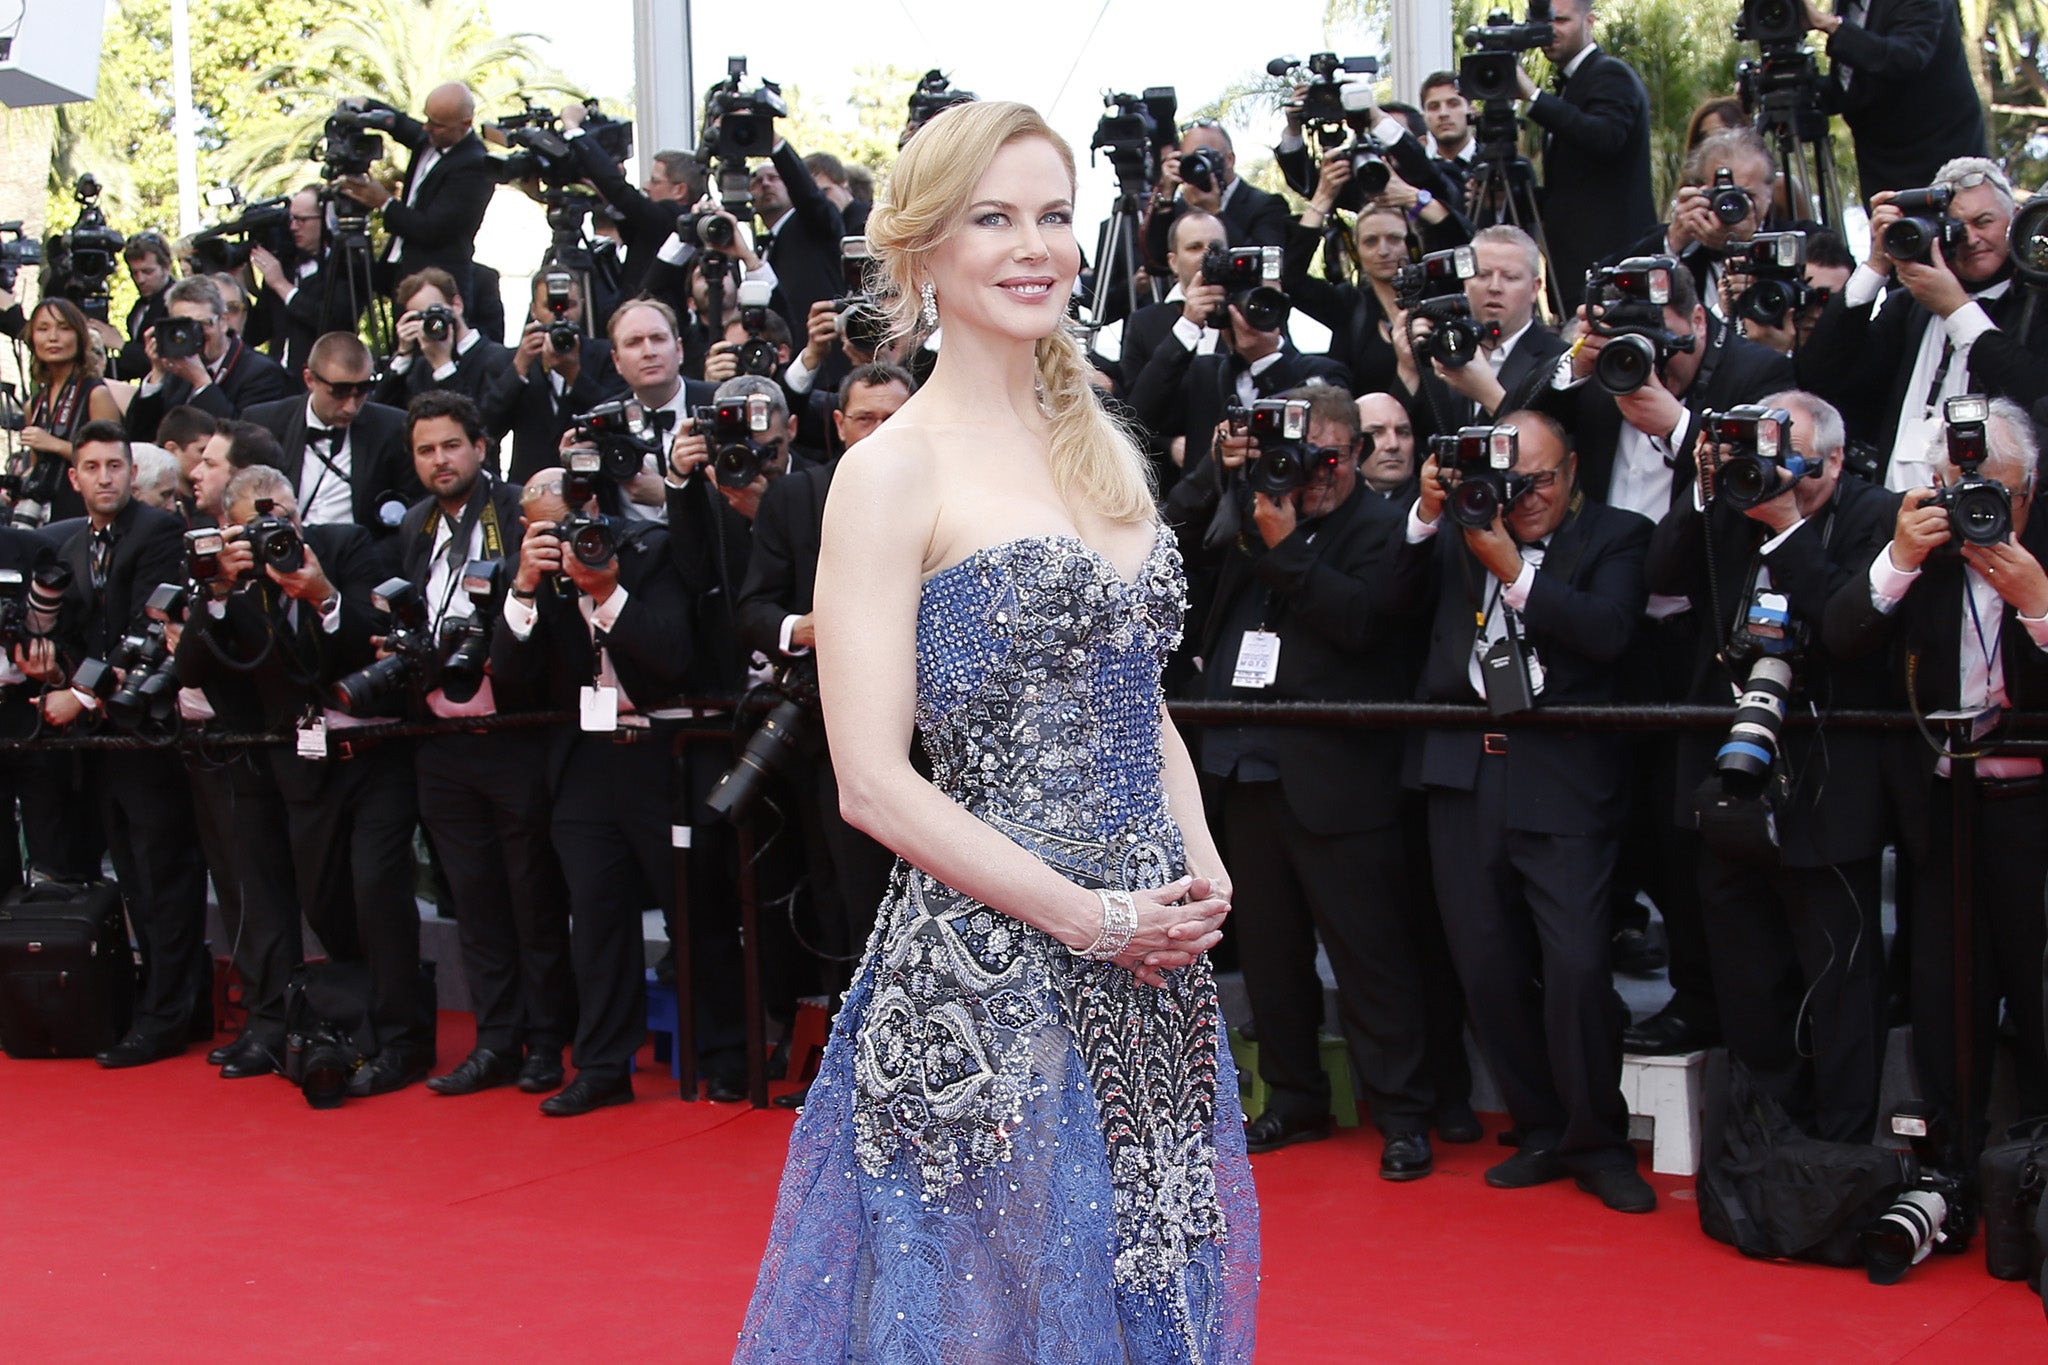 Nicole Kidman attends the Opening Ceremony at the Cannes Film Festival 2014